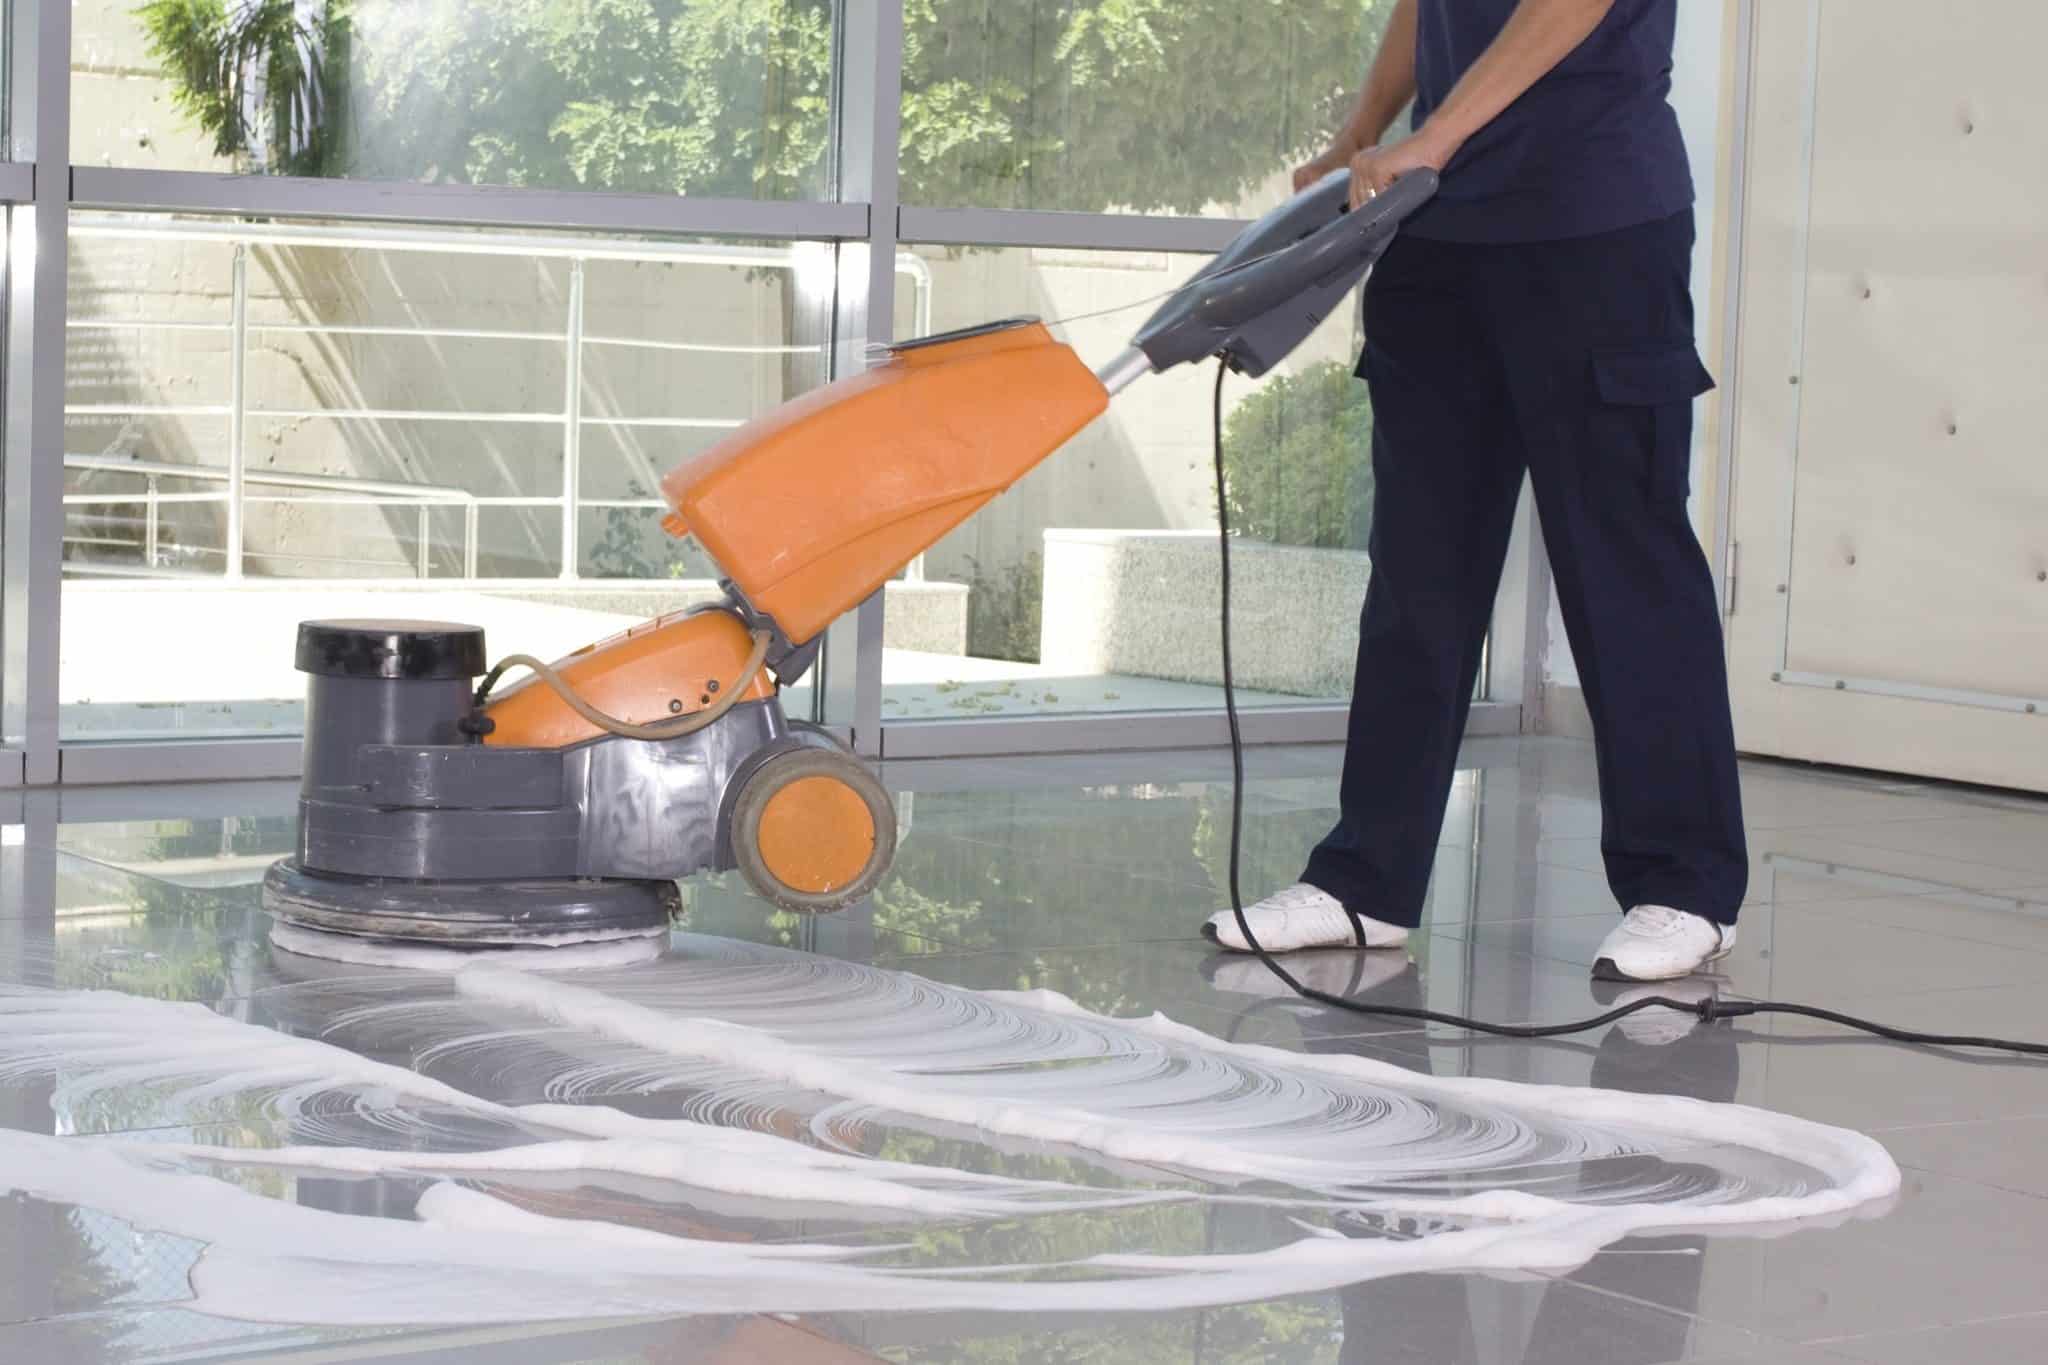 Five Ways Routine Professional Cleanings can Extend the Life of Your Tile and Stone